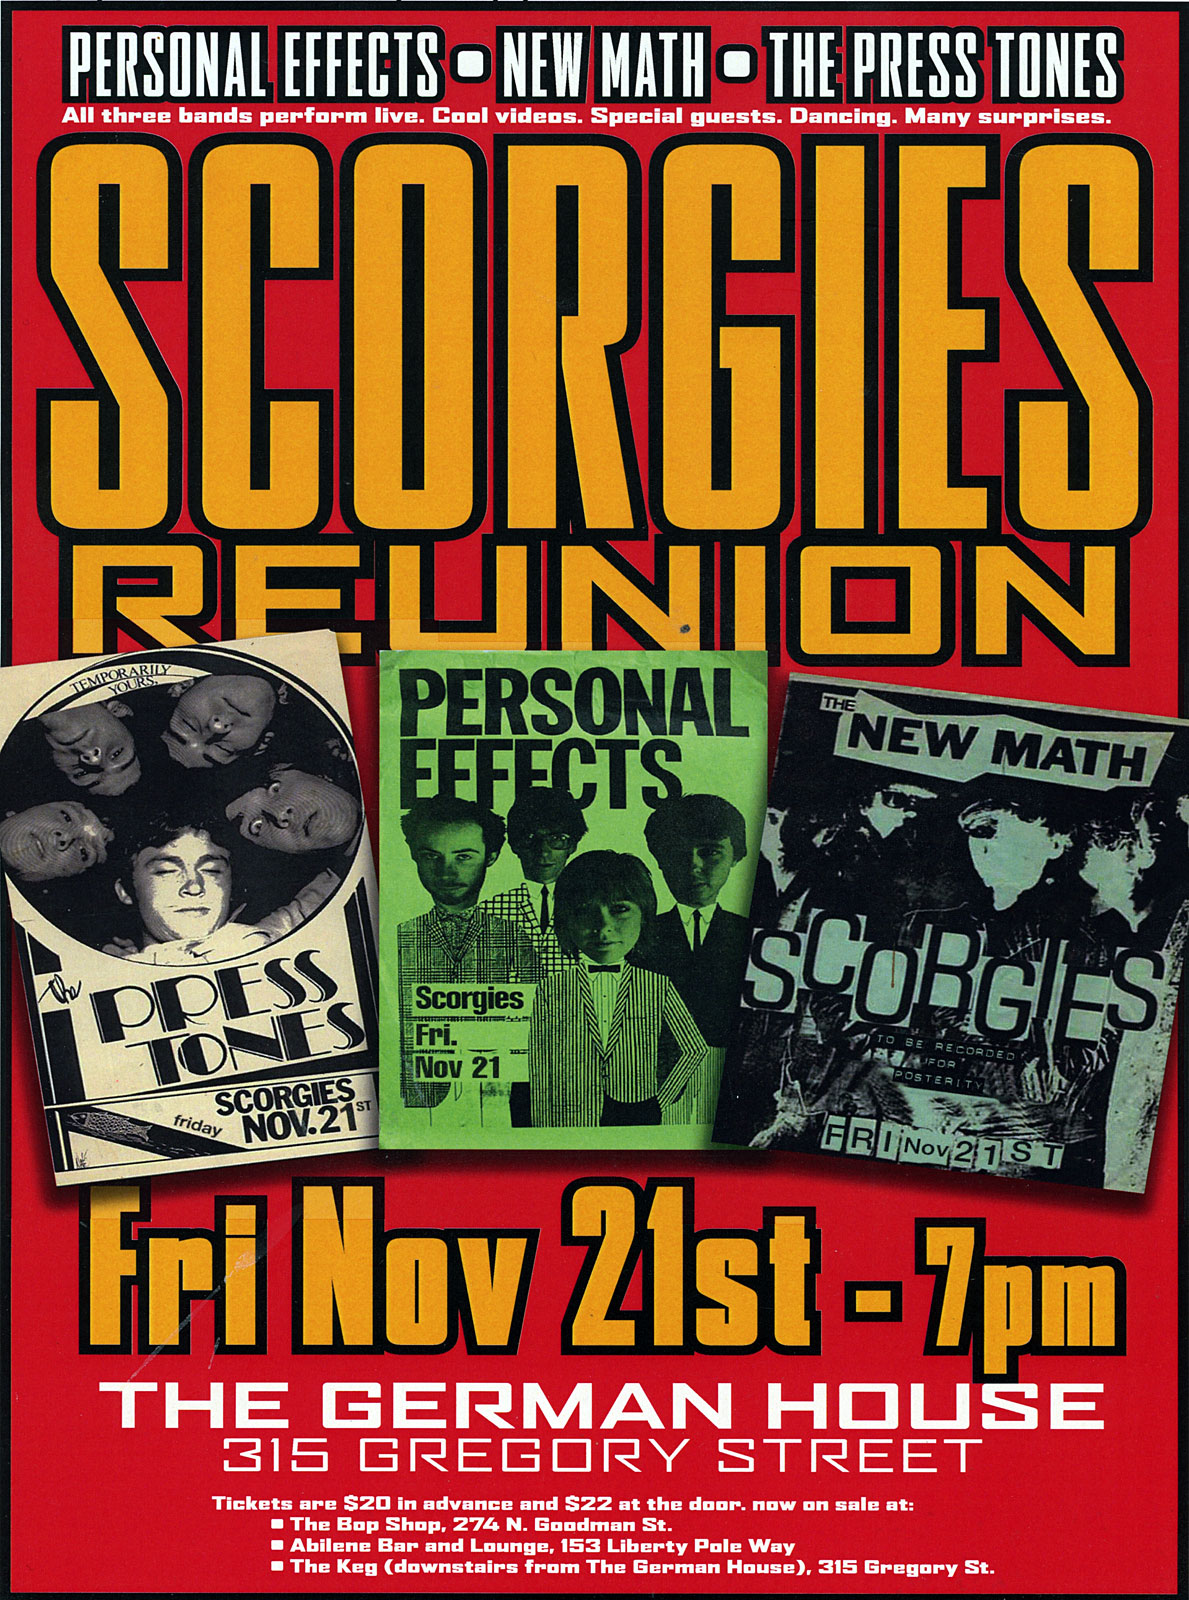 Poster for Scorgie's Reunion Concert at the German House in Rochester, New York in 2008. Show featured The Presstones, New Math and Personal Effects.